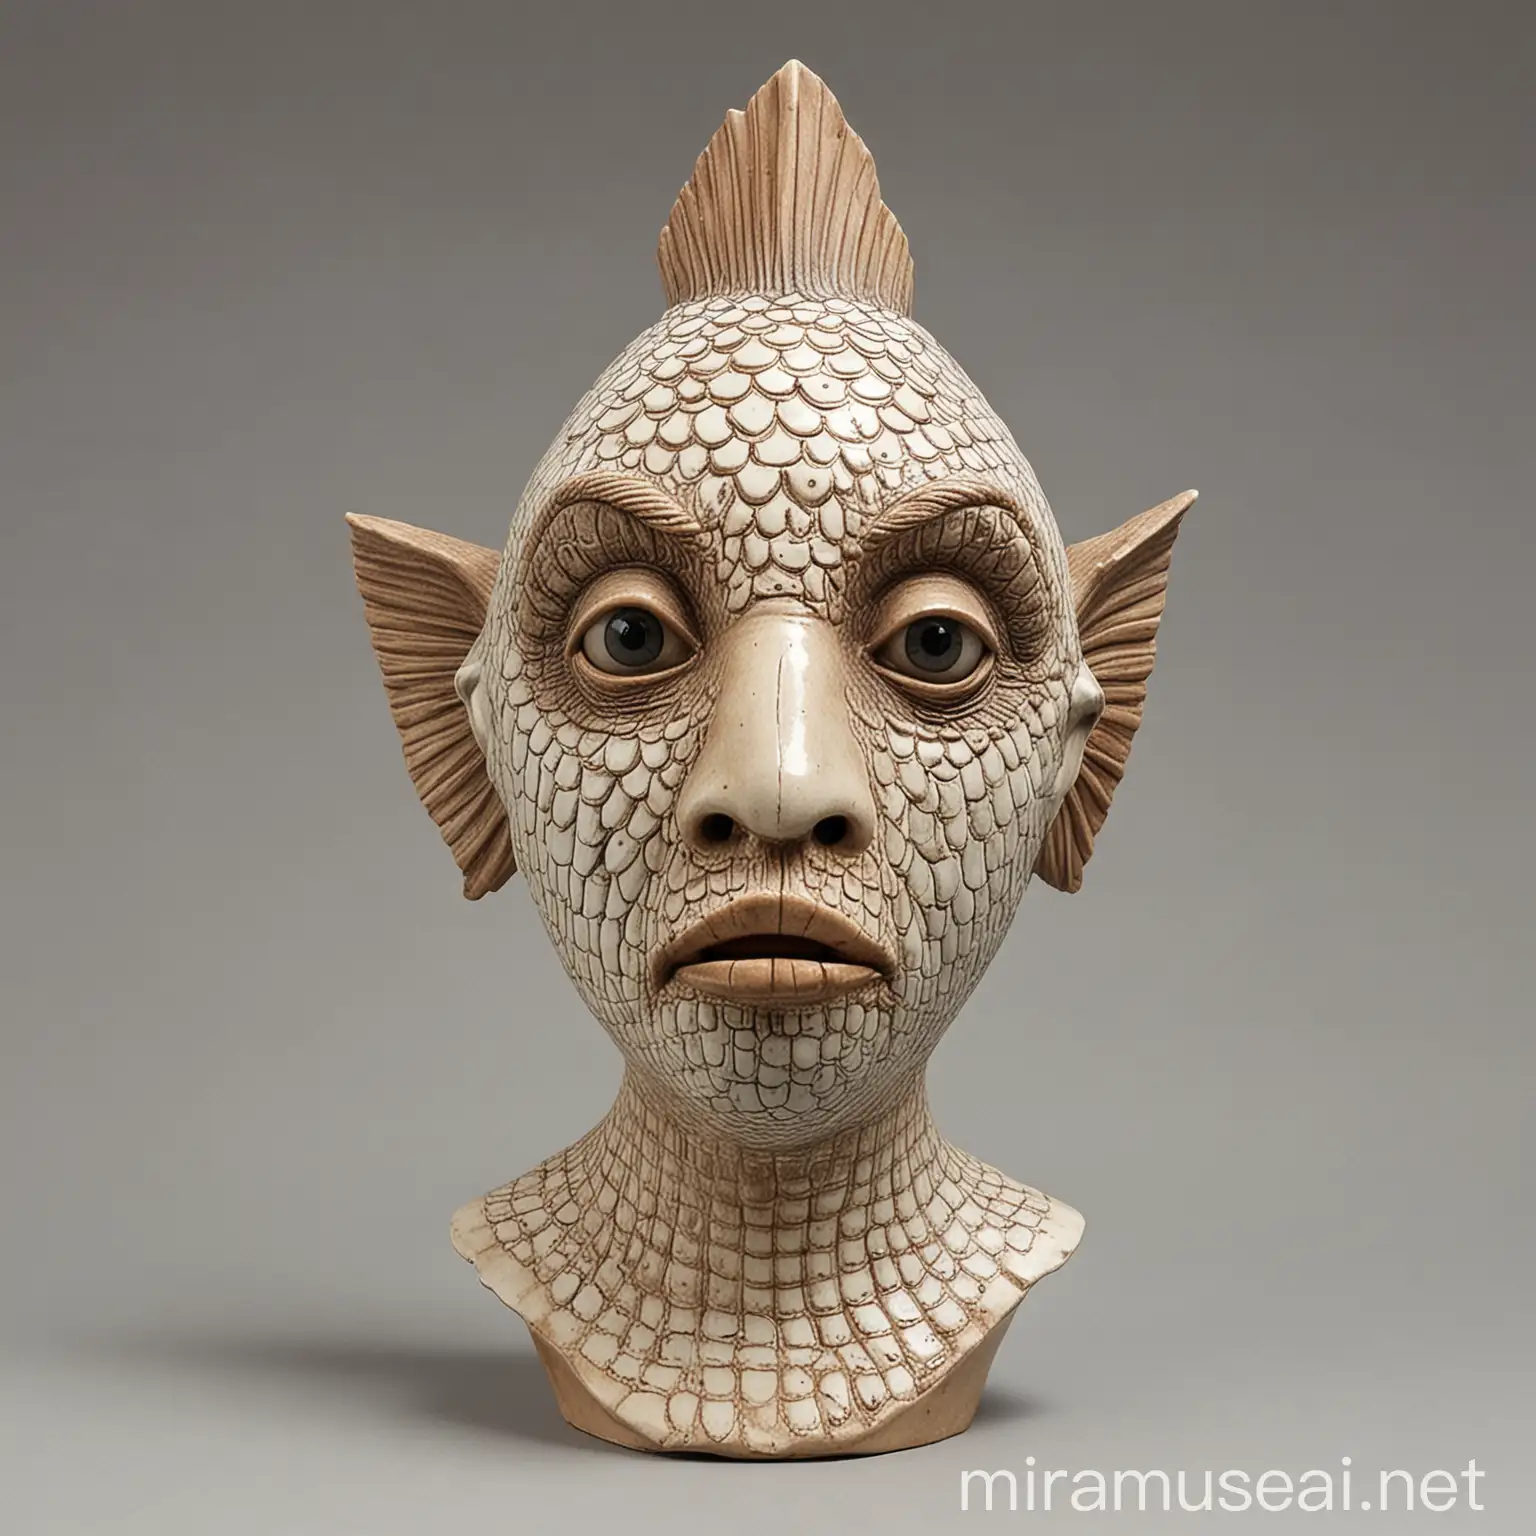 Primitive Ceramic Bust with HumanFish Features